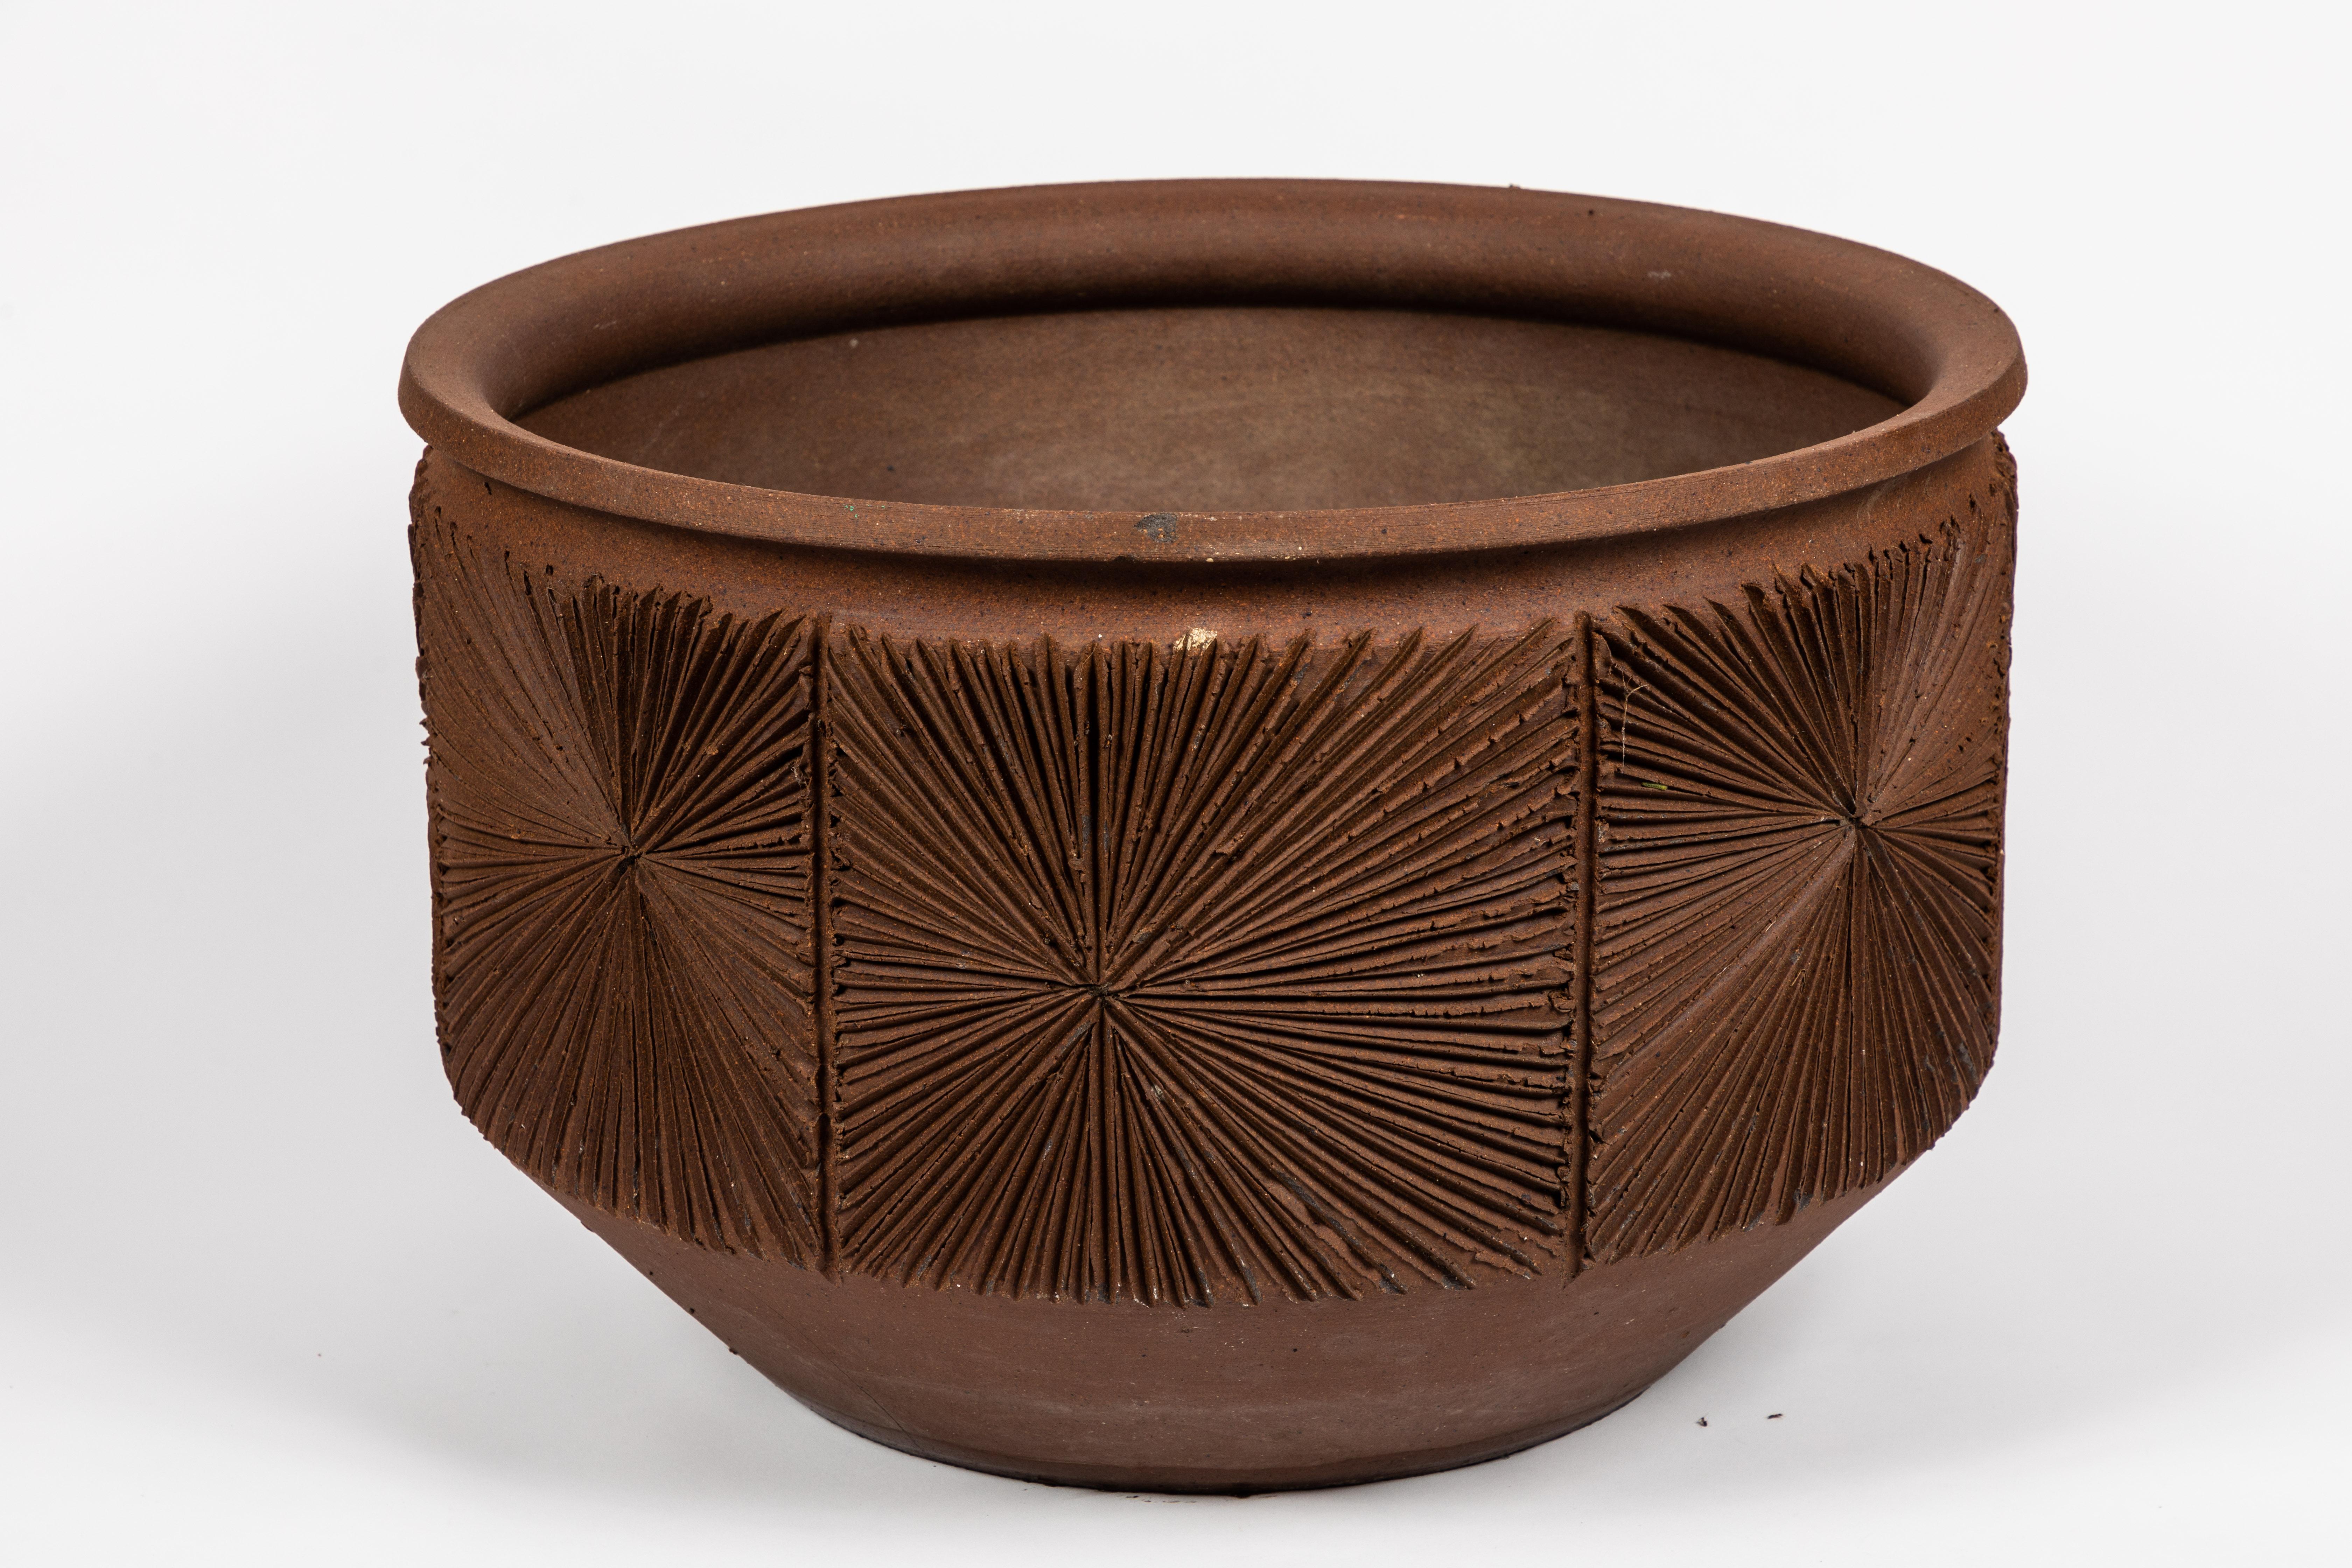 Monumental Robert Maxwell & David Cressey Sunburst planter for Earthgender. Studio executed in hand etched textured earthenware. A very clean example from the short-lived and increasingly coveted design collective that only existed for a few